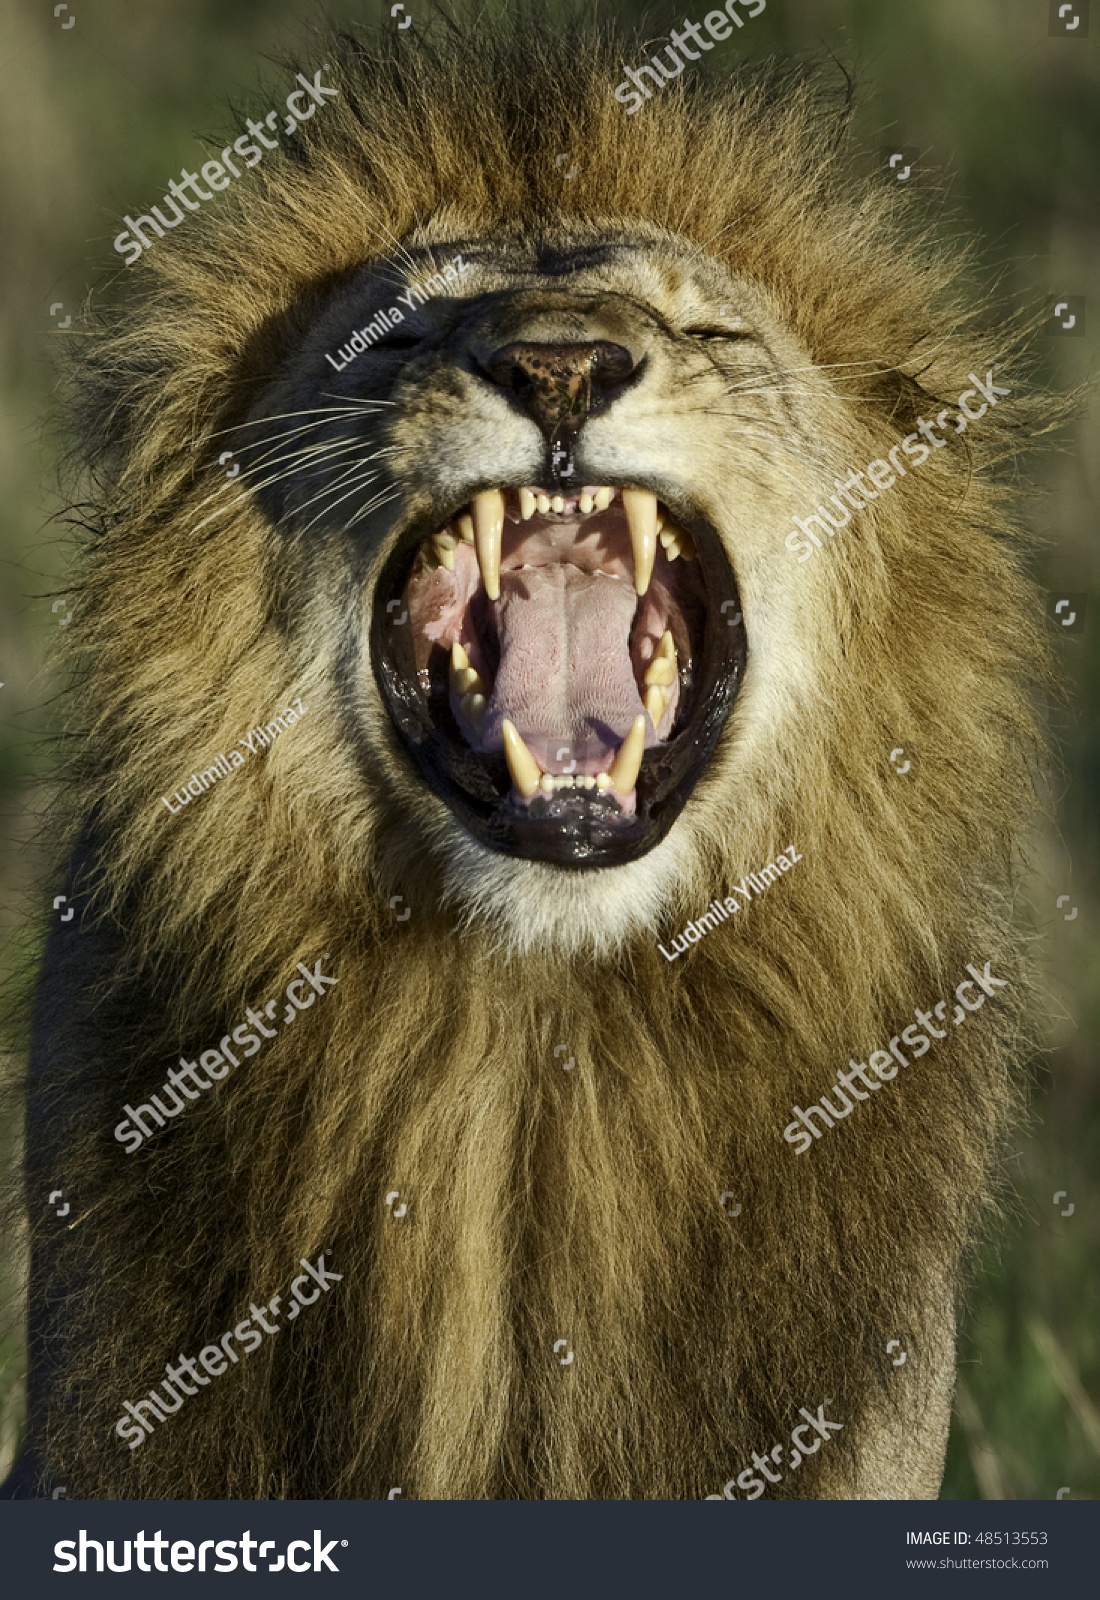 Lions Mouth Open 75